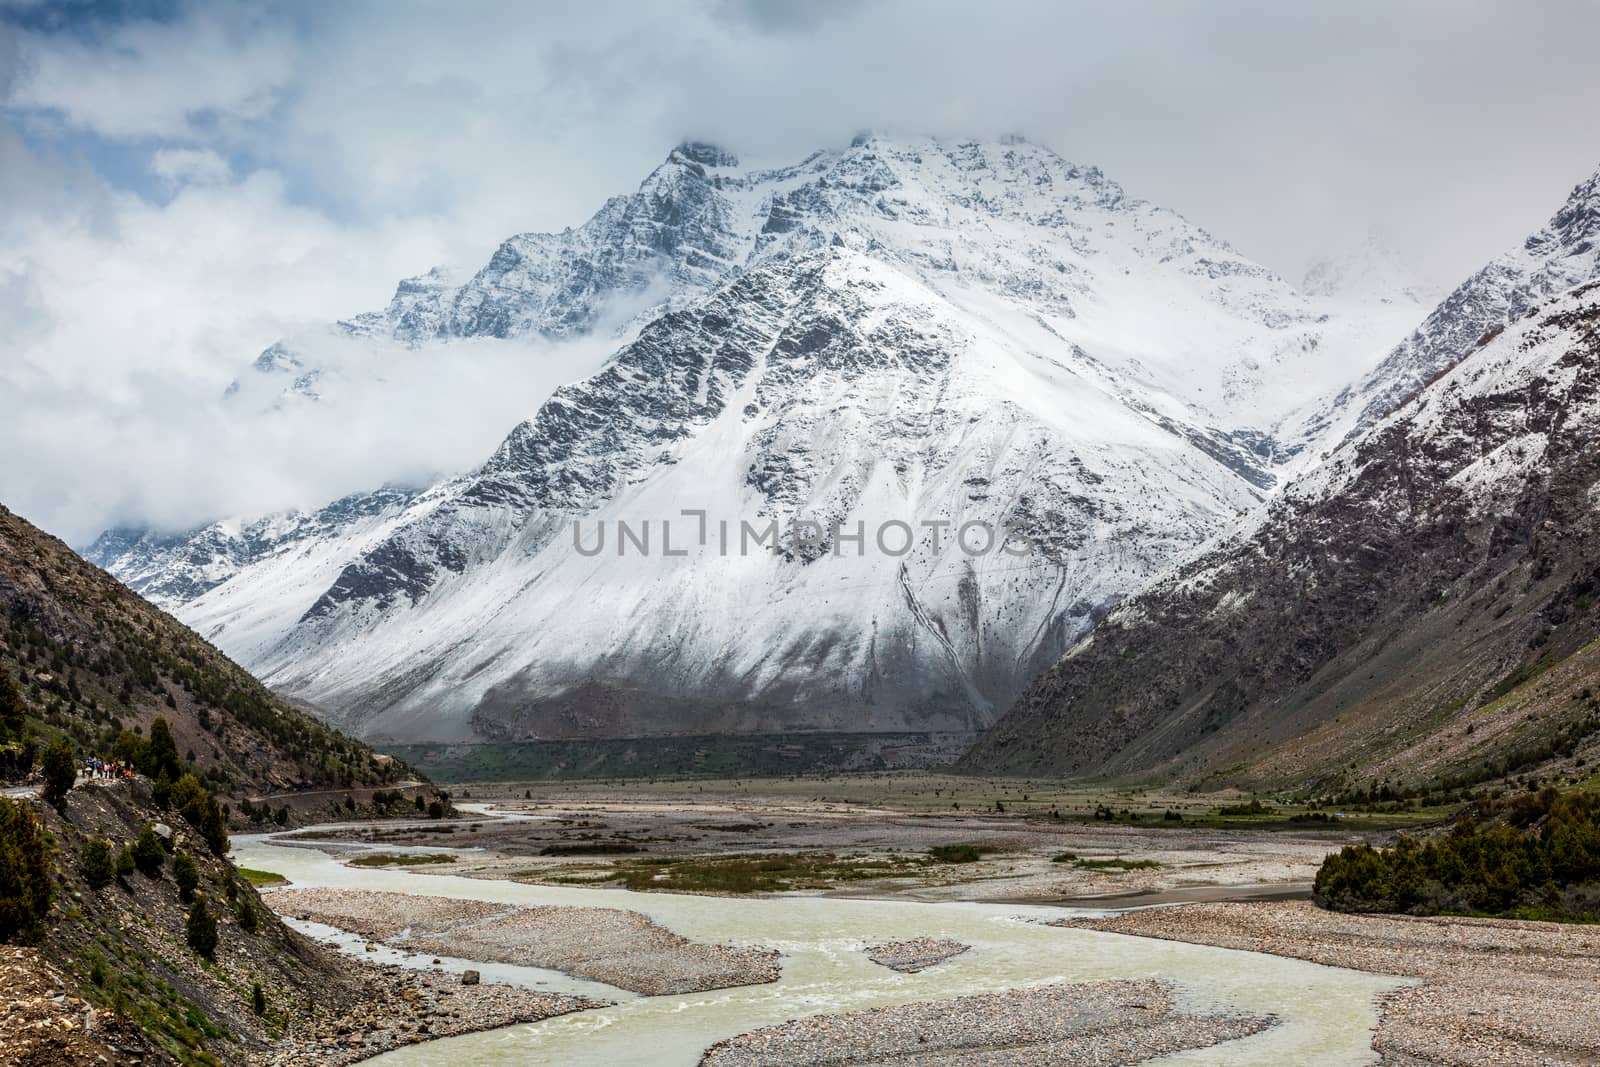 Himalayan landscape scenery in Lahaul valley in Himalayas with snowcapped mountains. Himachal Pradesh, India